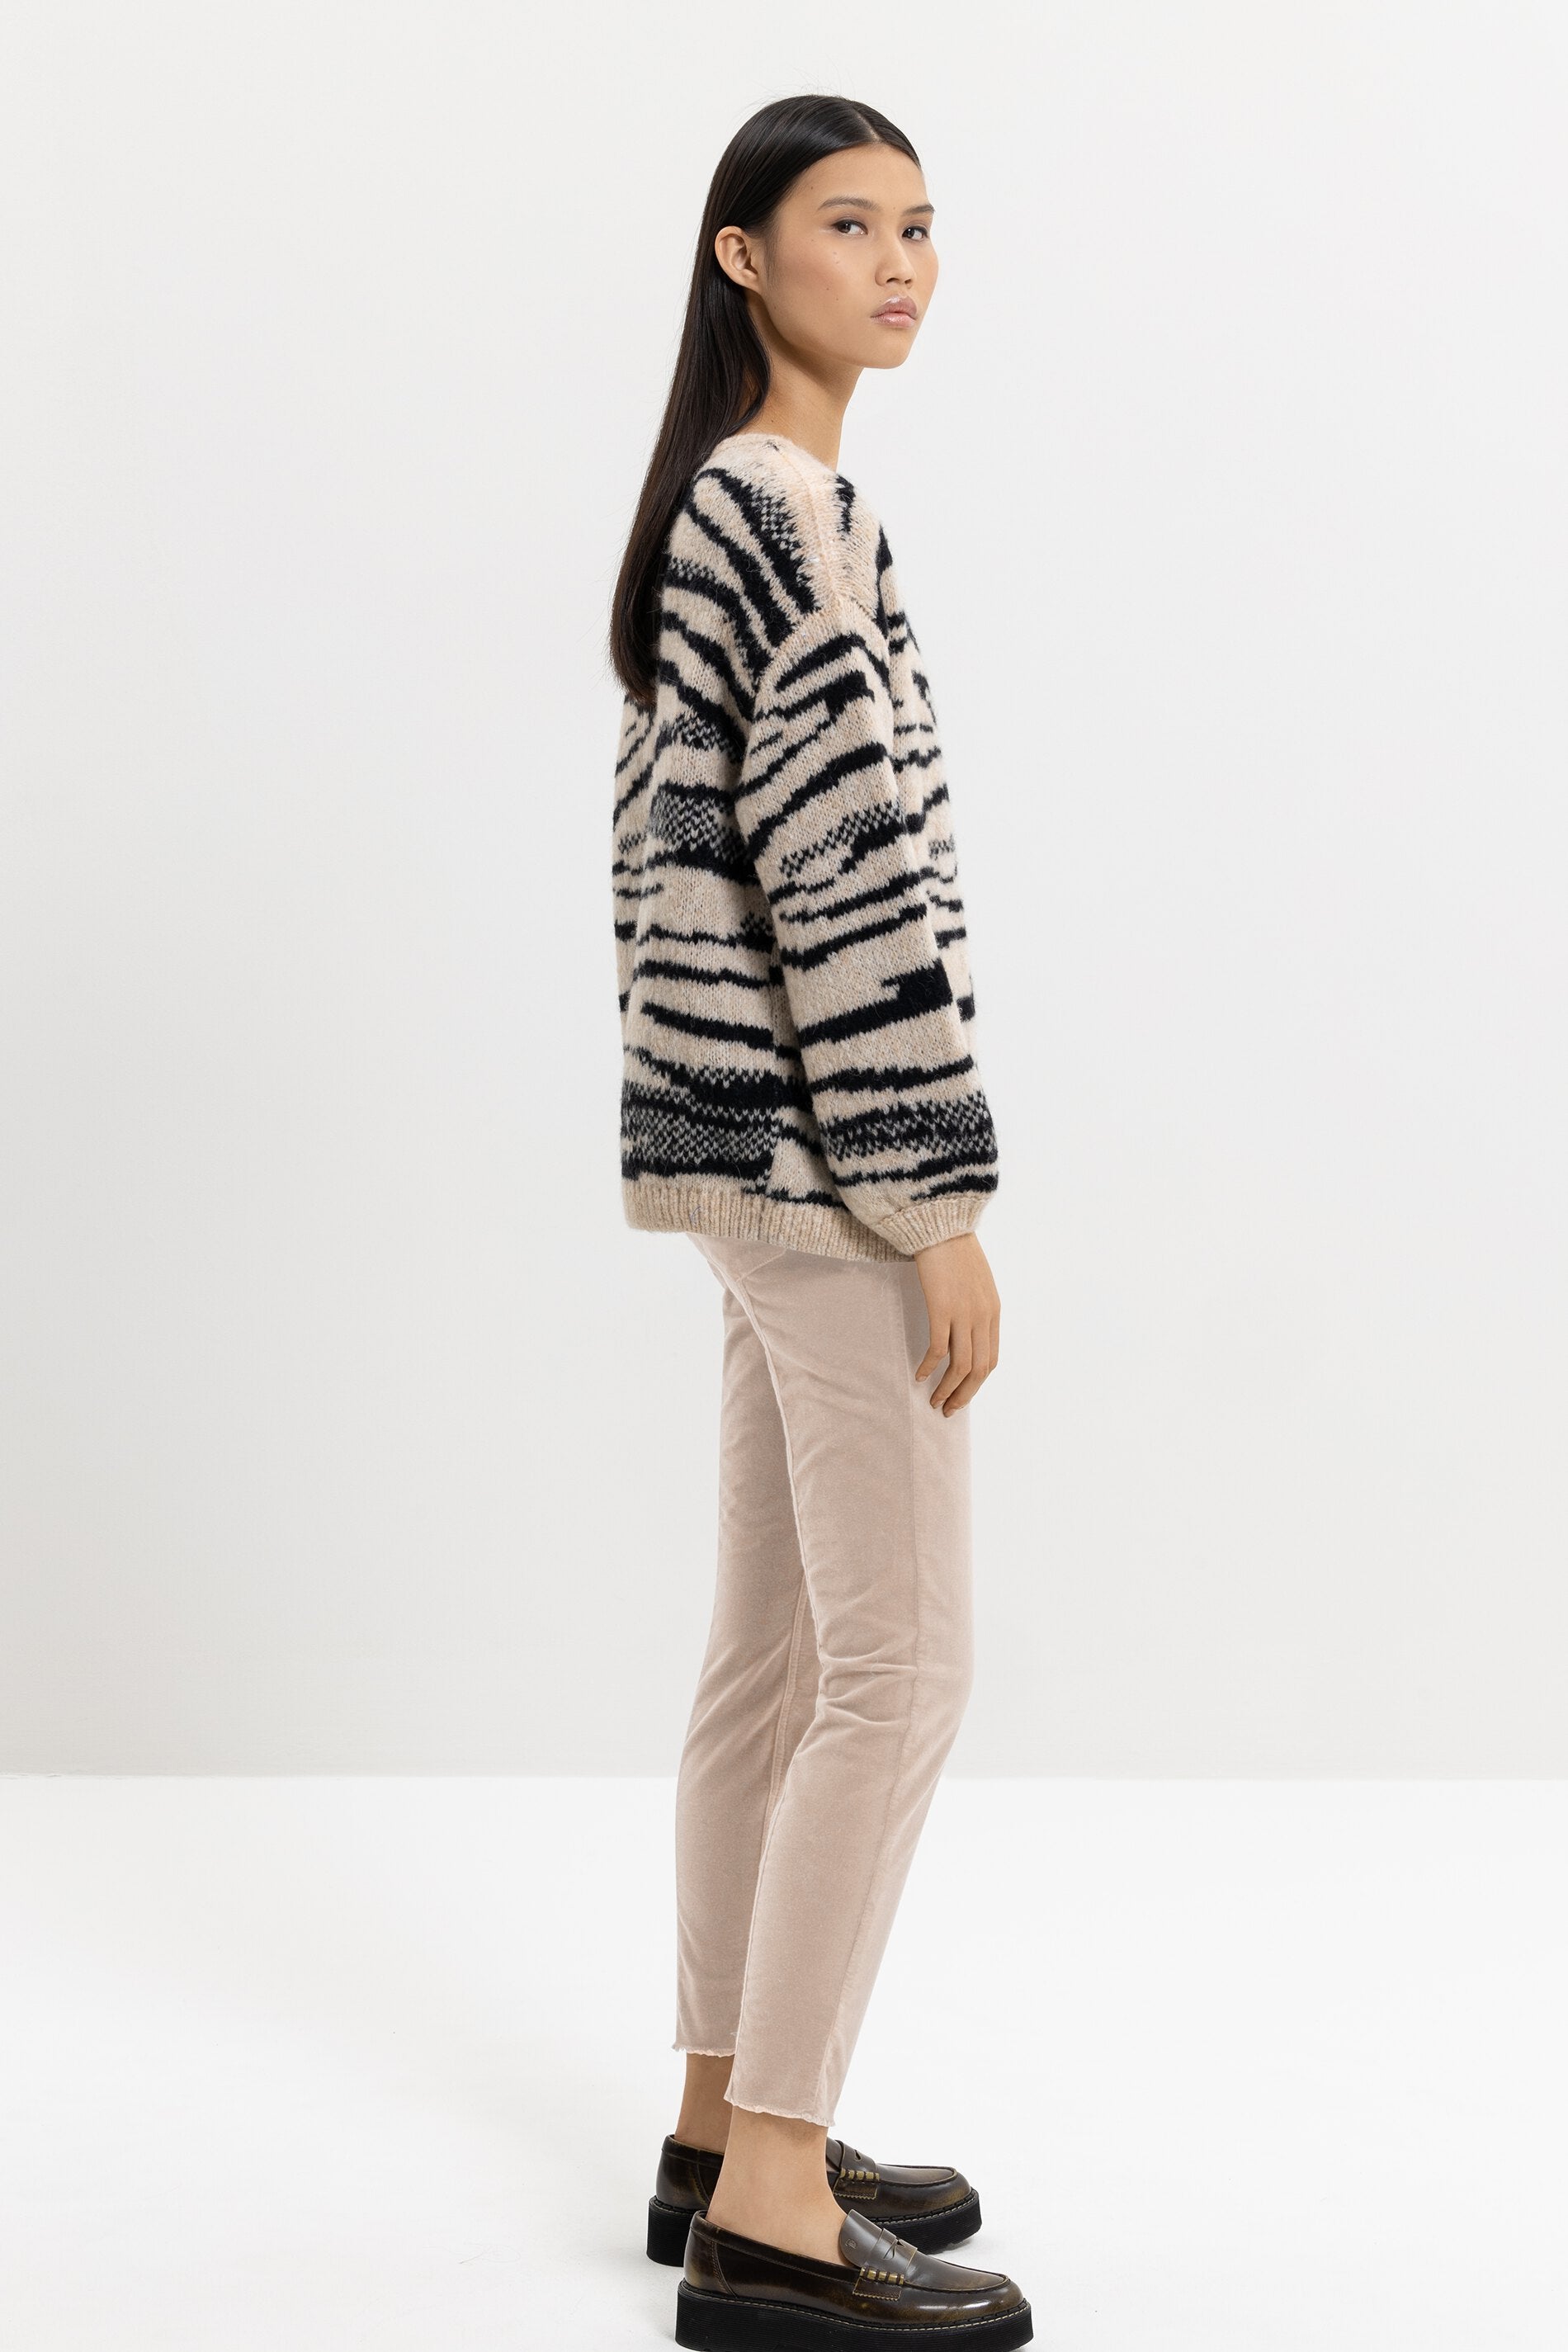 LUISA CERANO-OUTLET-SALE-Cardigan in Animal-Jacquard-Strick-by-ARCHIVIST